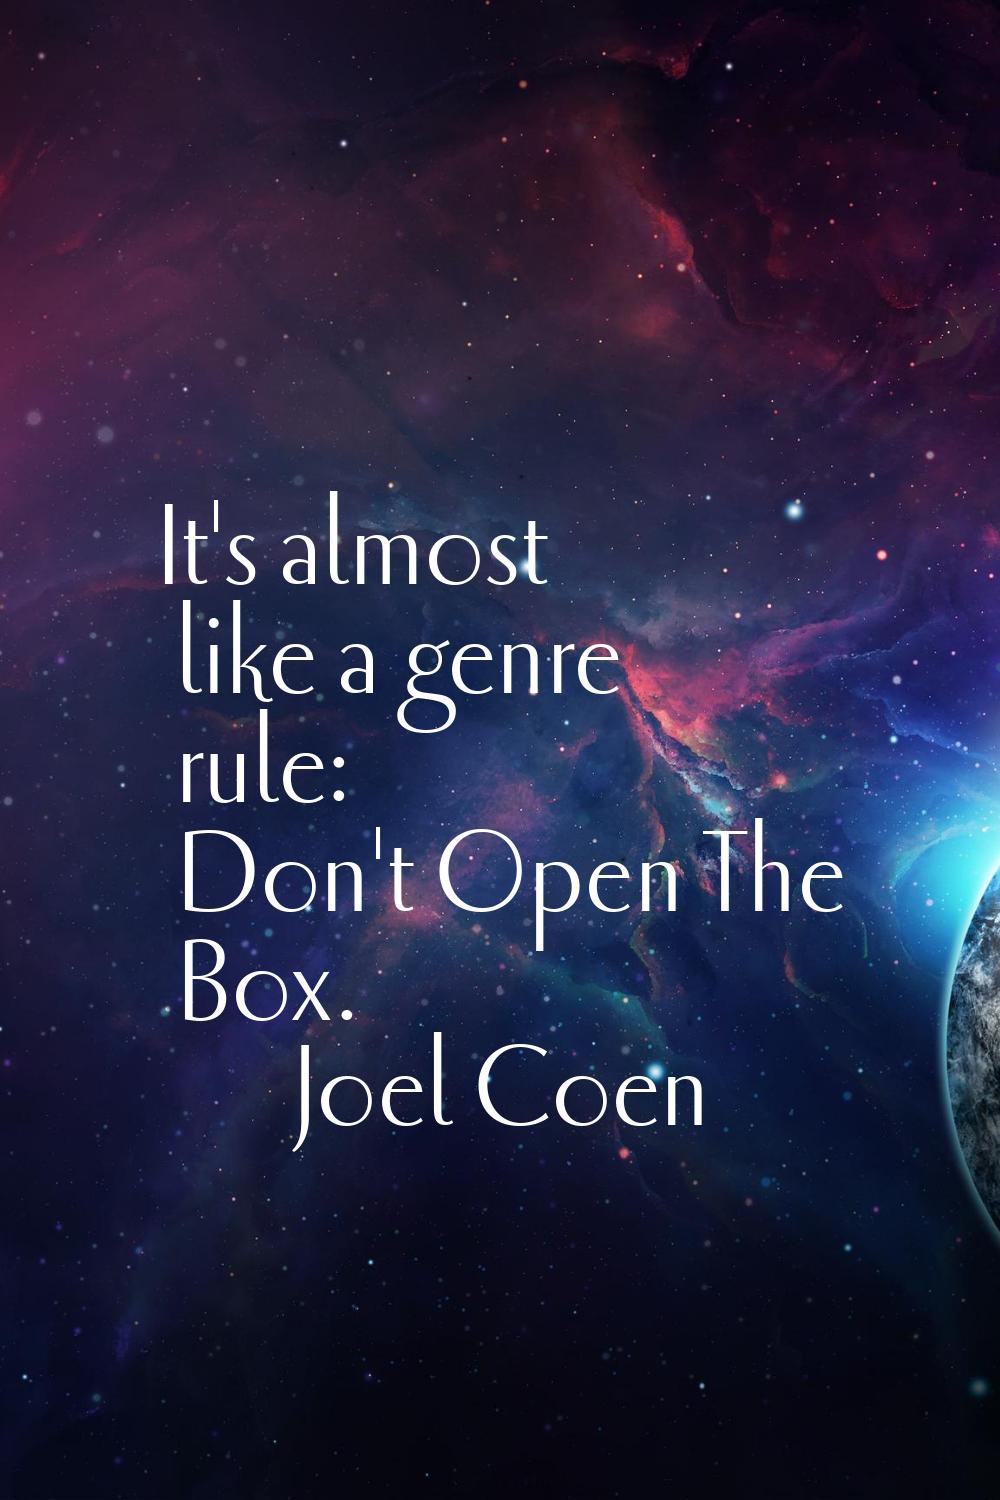 It's almost like a genre rule: Don't Open The Box.